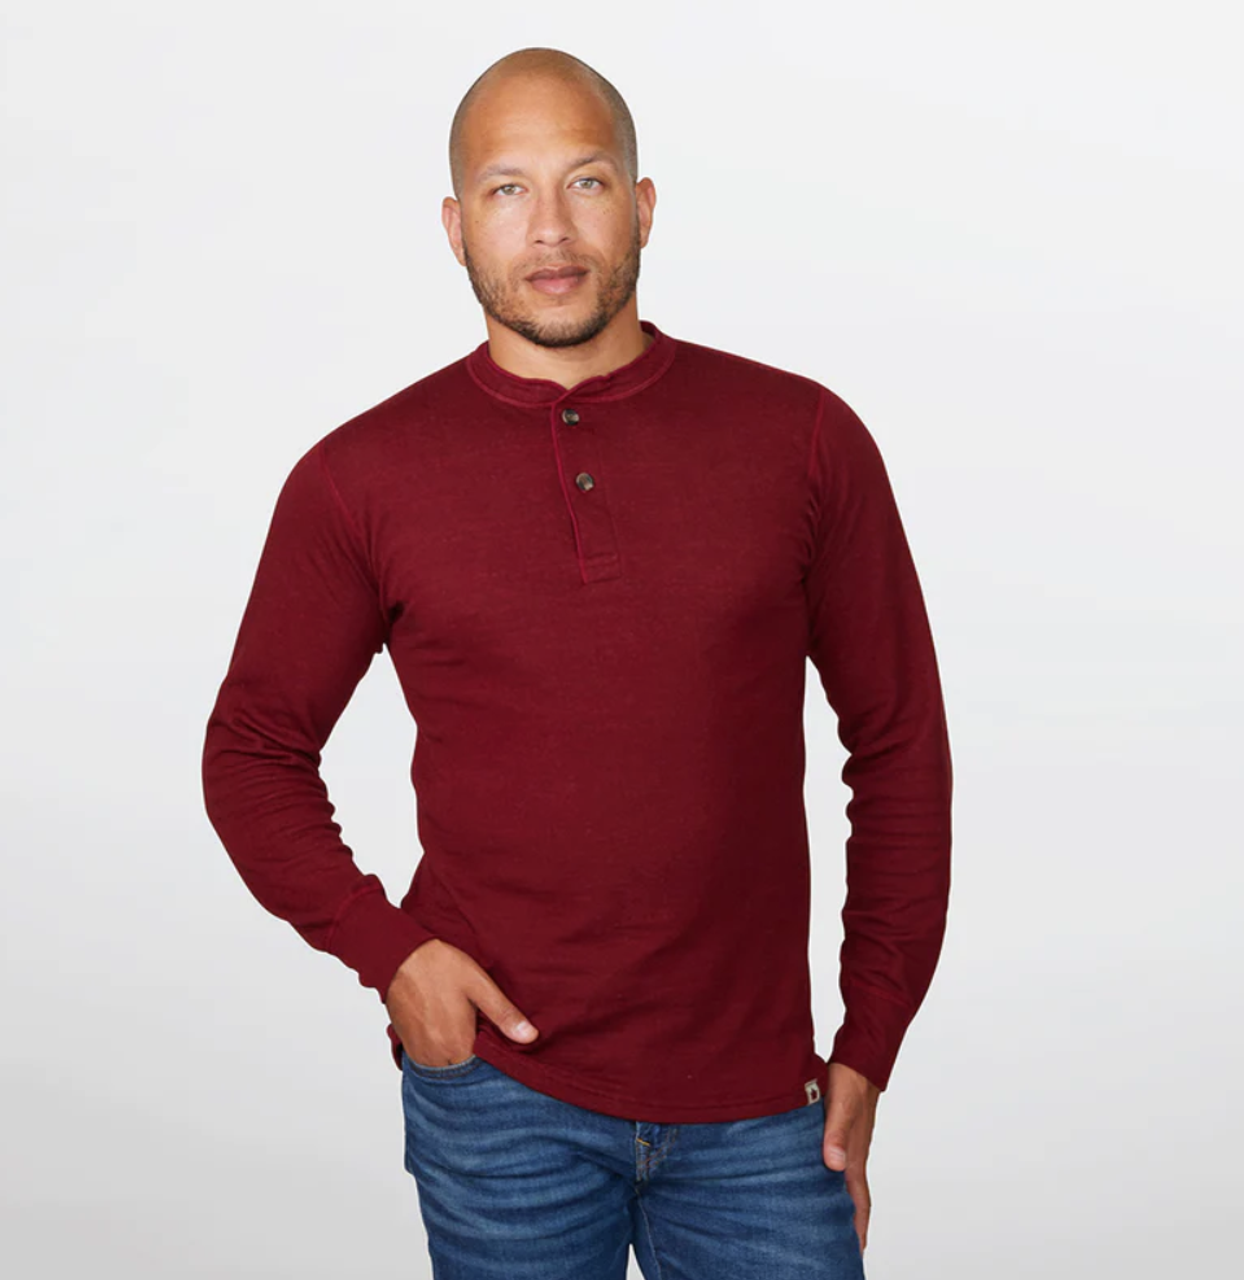 https://cdn11.bigcommerce.com/s-972n9uoi/images/stencil/1280x1280/products/5342/18971/Stanfields_1387_Merino_Blend_Henley__25223.1666203202.png?c=2